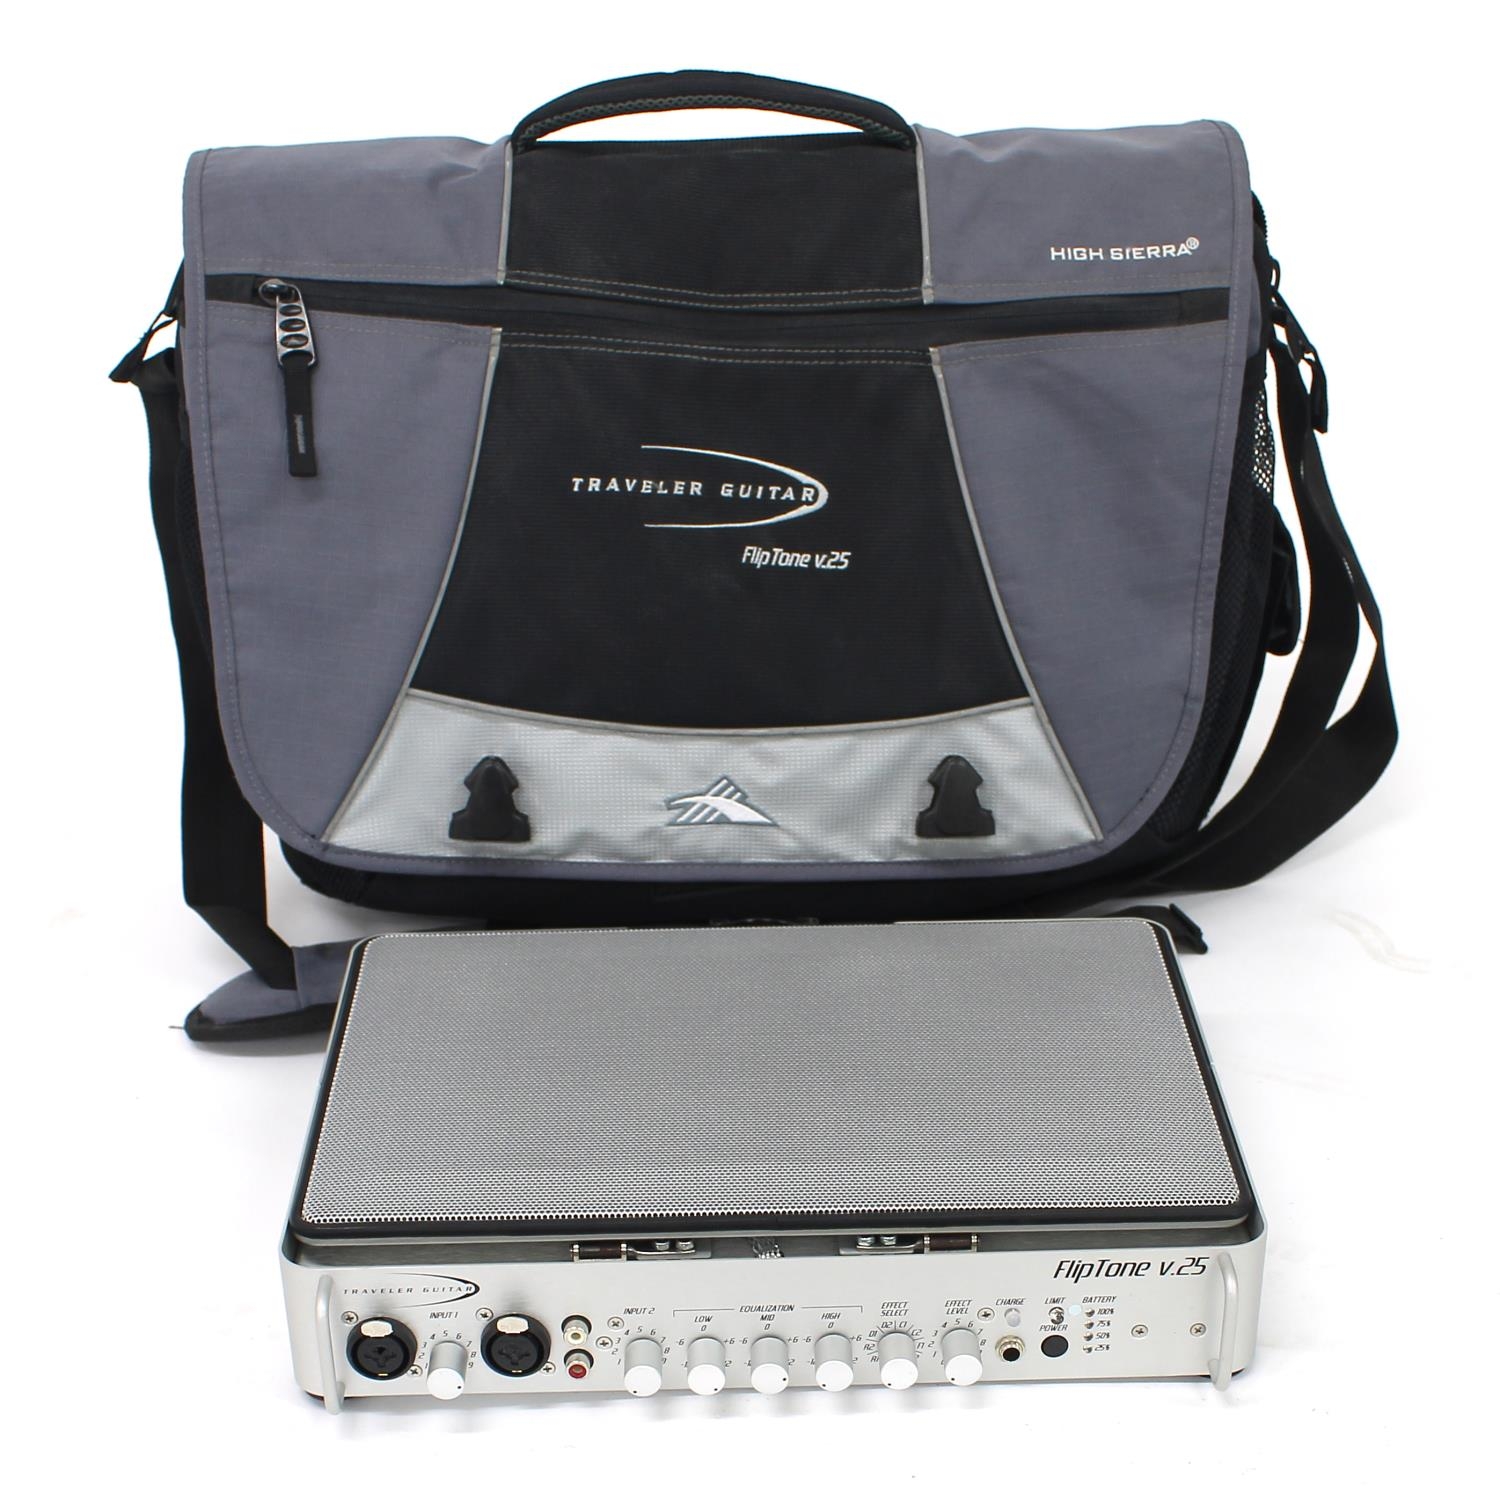 Traveller Guitar Fliptone V25 portable amplifier, with charger and gig bag